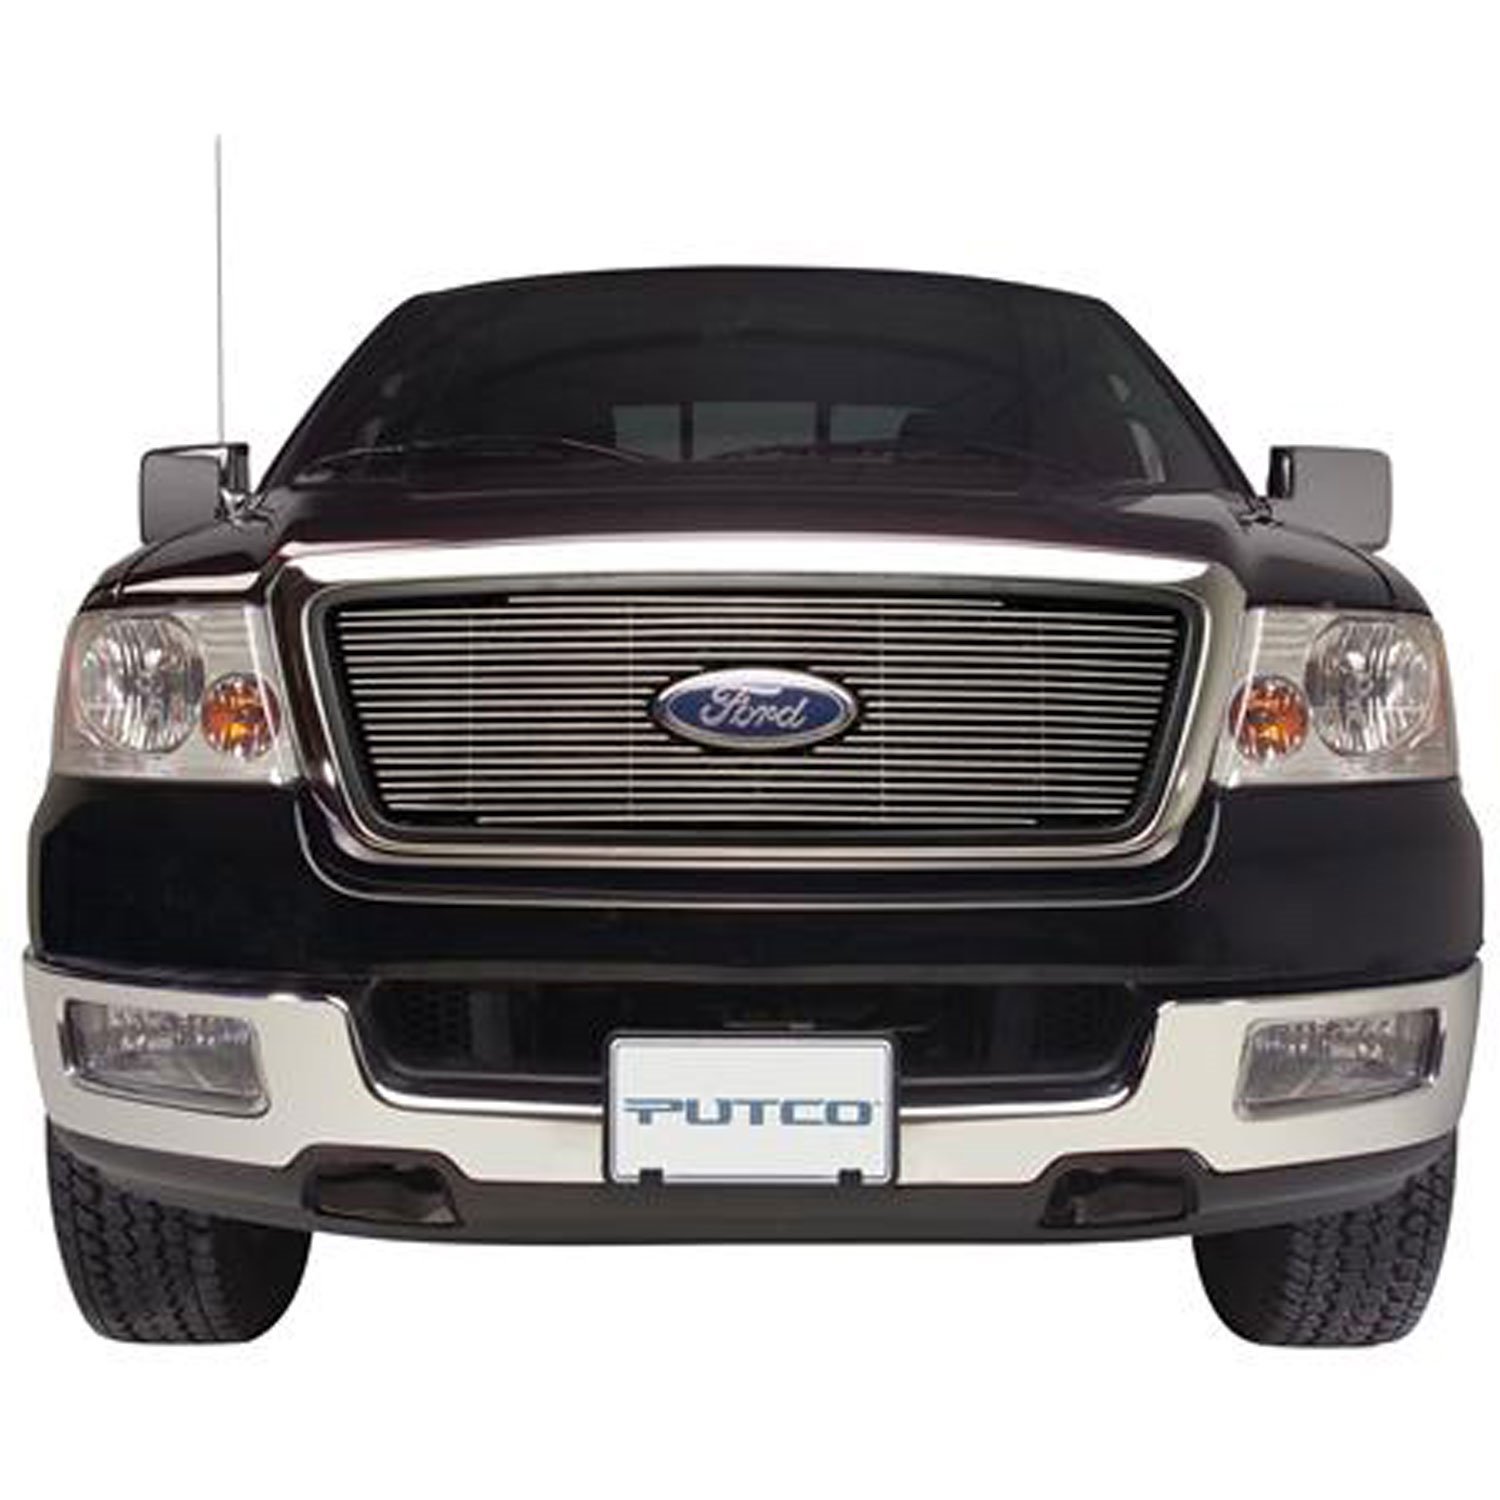 Shadow Boss Grille 2005-07 Ford F-Series Super Duty